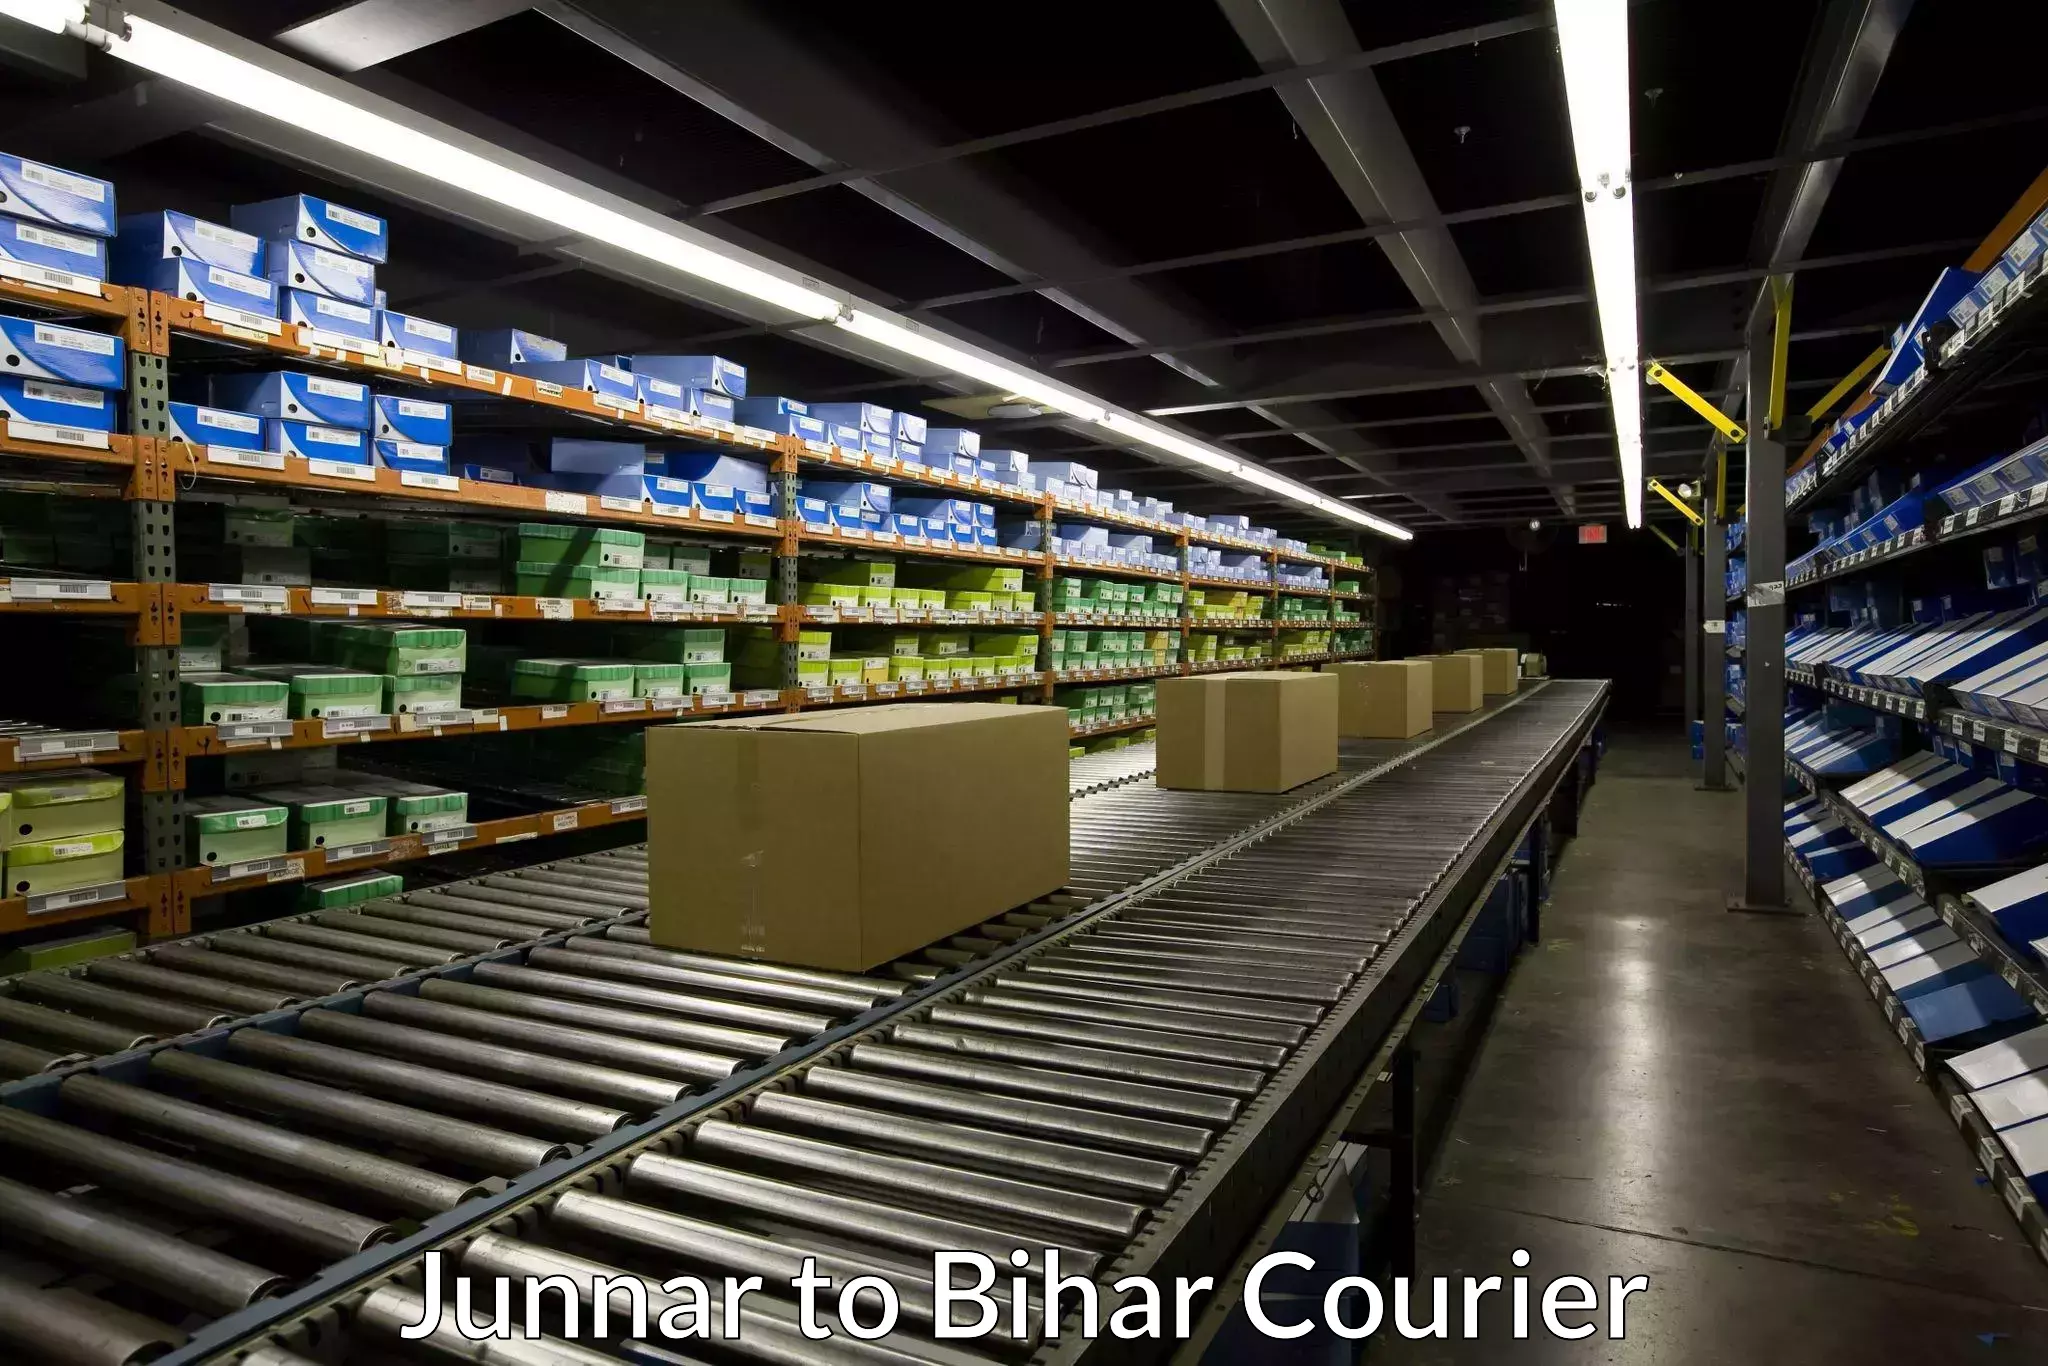 Courier service partnerships in Junnar to Bihar